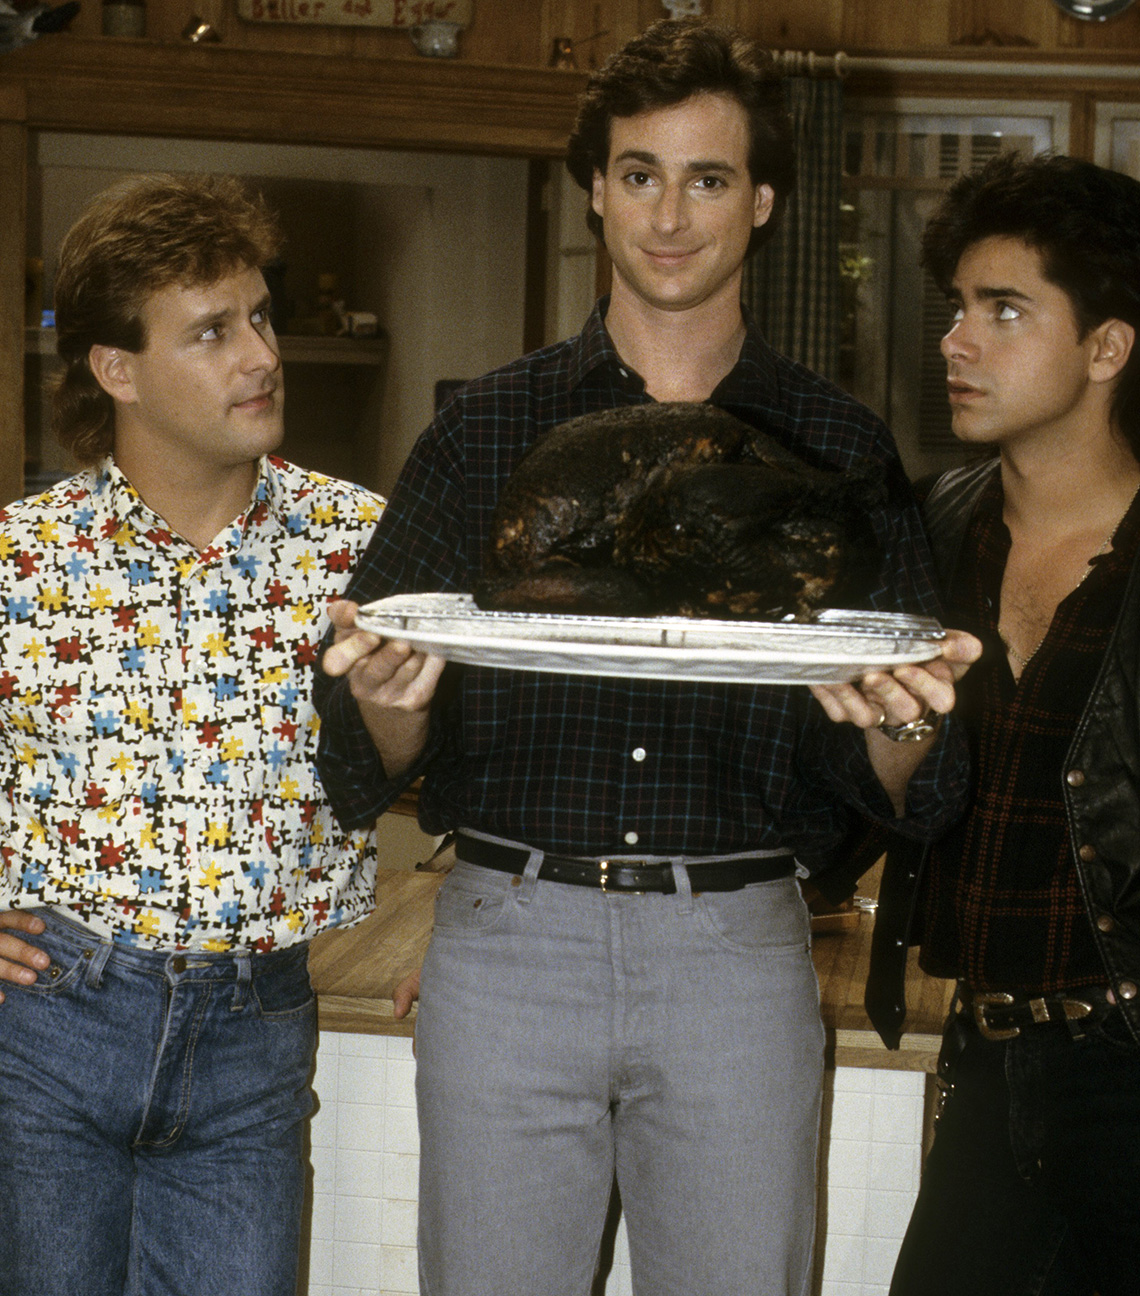 Bob Saget holding a completely burnt turkey with Dave Coulier and John Stamos looking and standing beside him in a scene from Full House